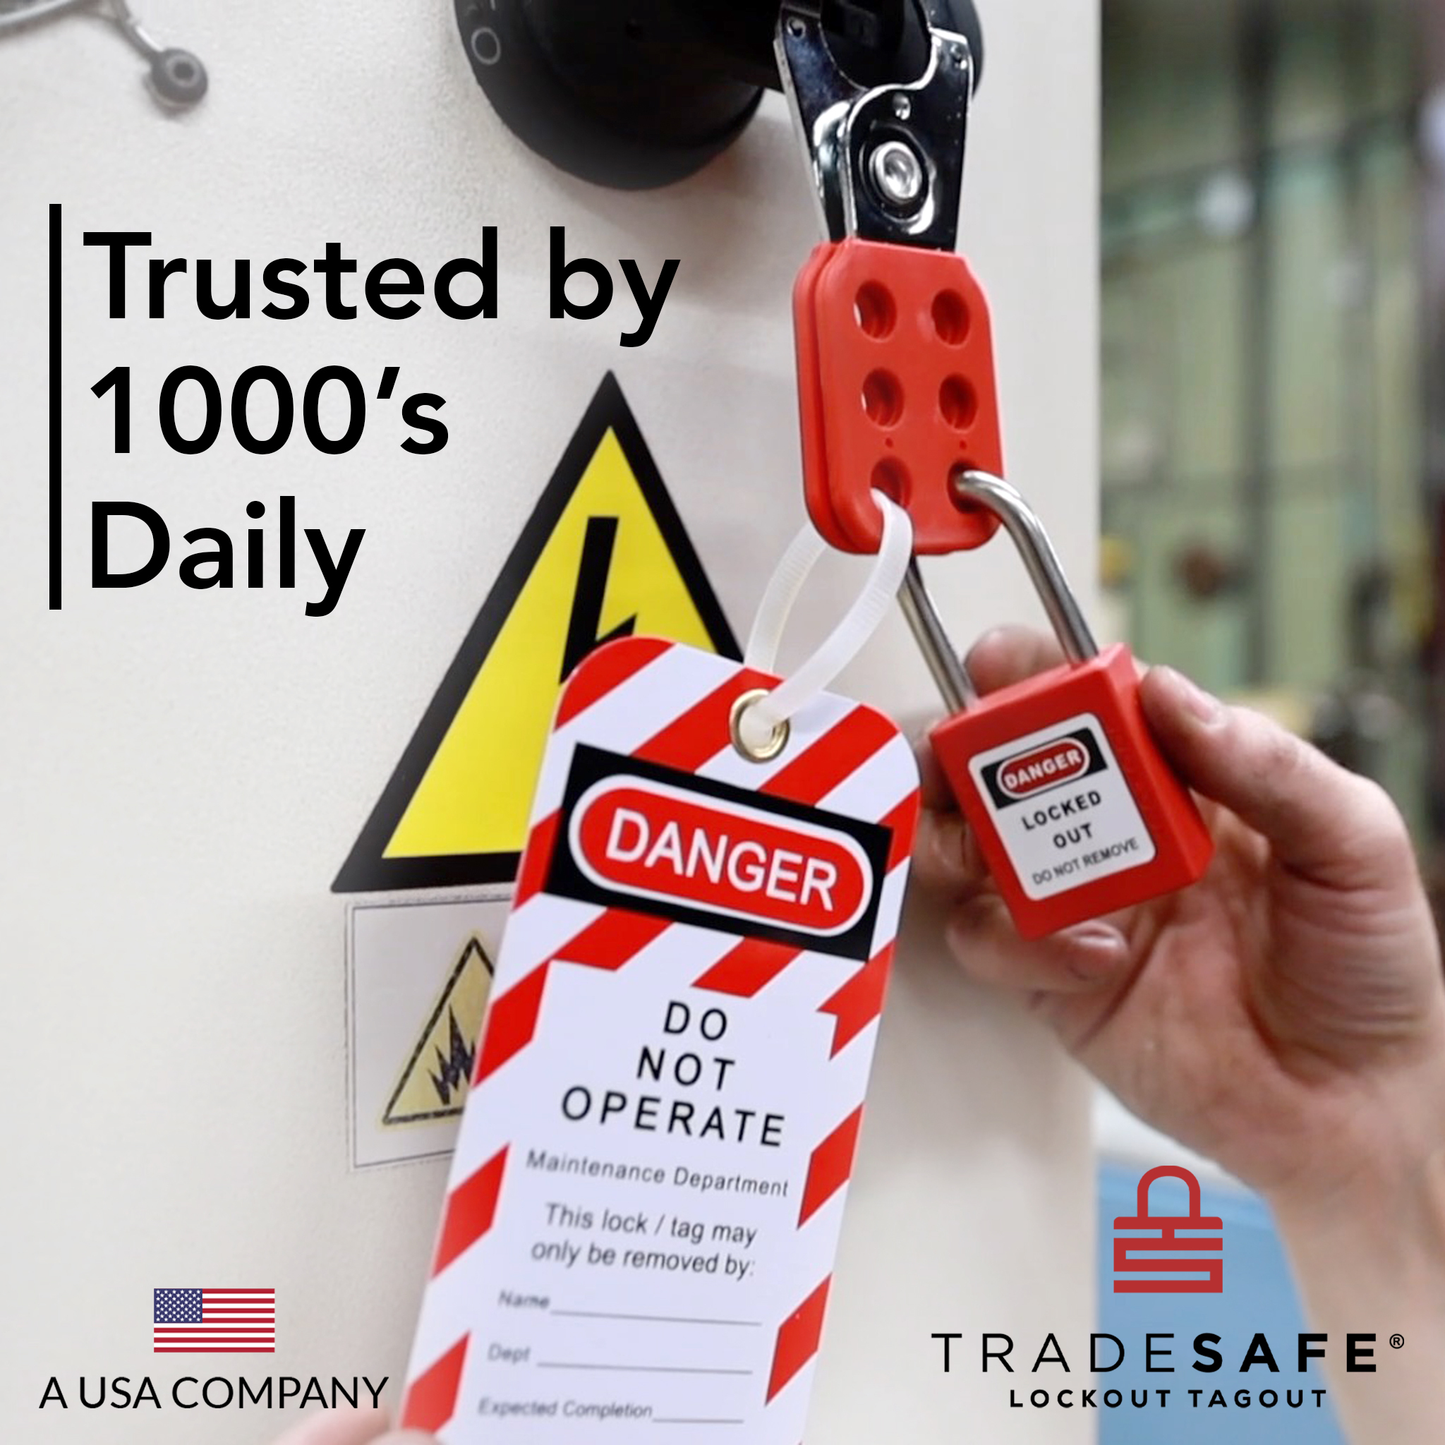 lockout tagout tradesafe trusted by 1000s daily